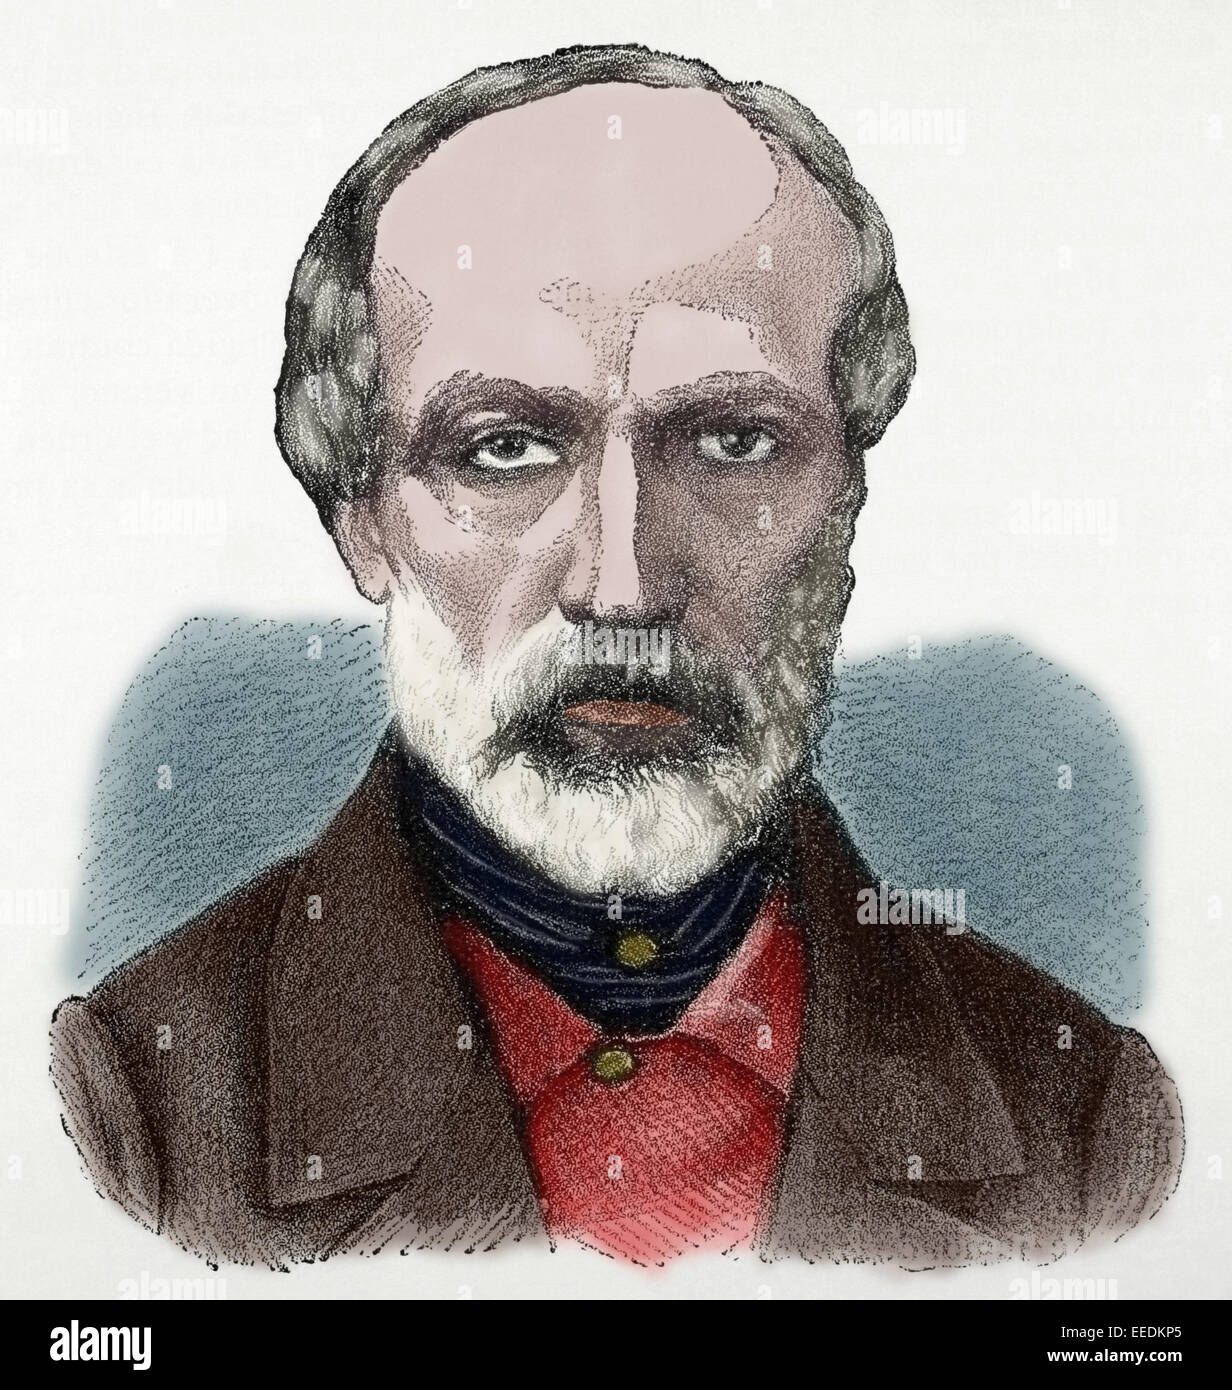 Giuseppe Mazzini (1805-1872). Italian politician, activist for the unification of Italy. Engraving by Klose. Nuestro Siglo, 1883. Colored. Stock Photo